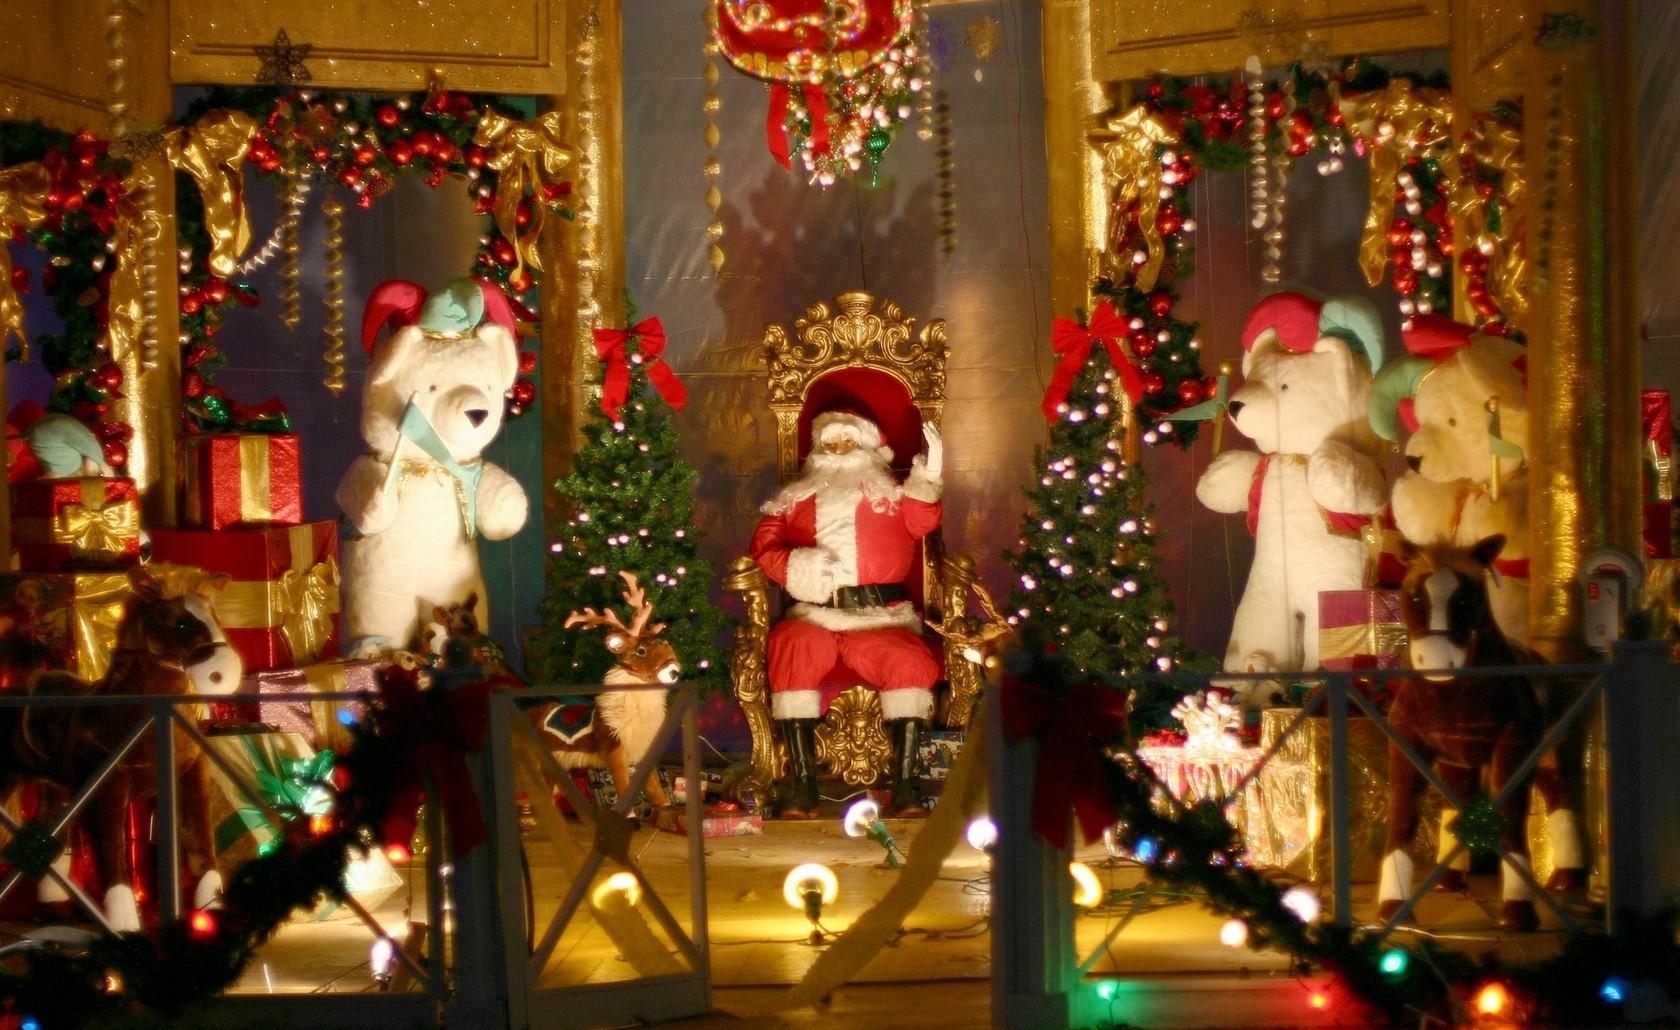 holidays, santa claus, decorations, toys, fir trees, bears, christmas, armchair, fencing, enclosure, presents, gifts